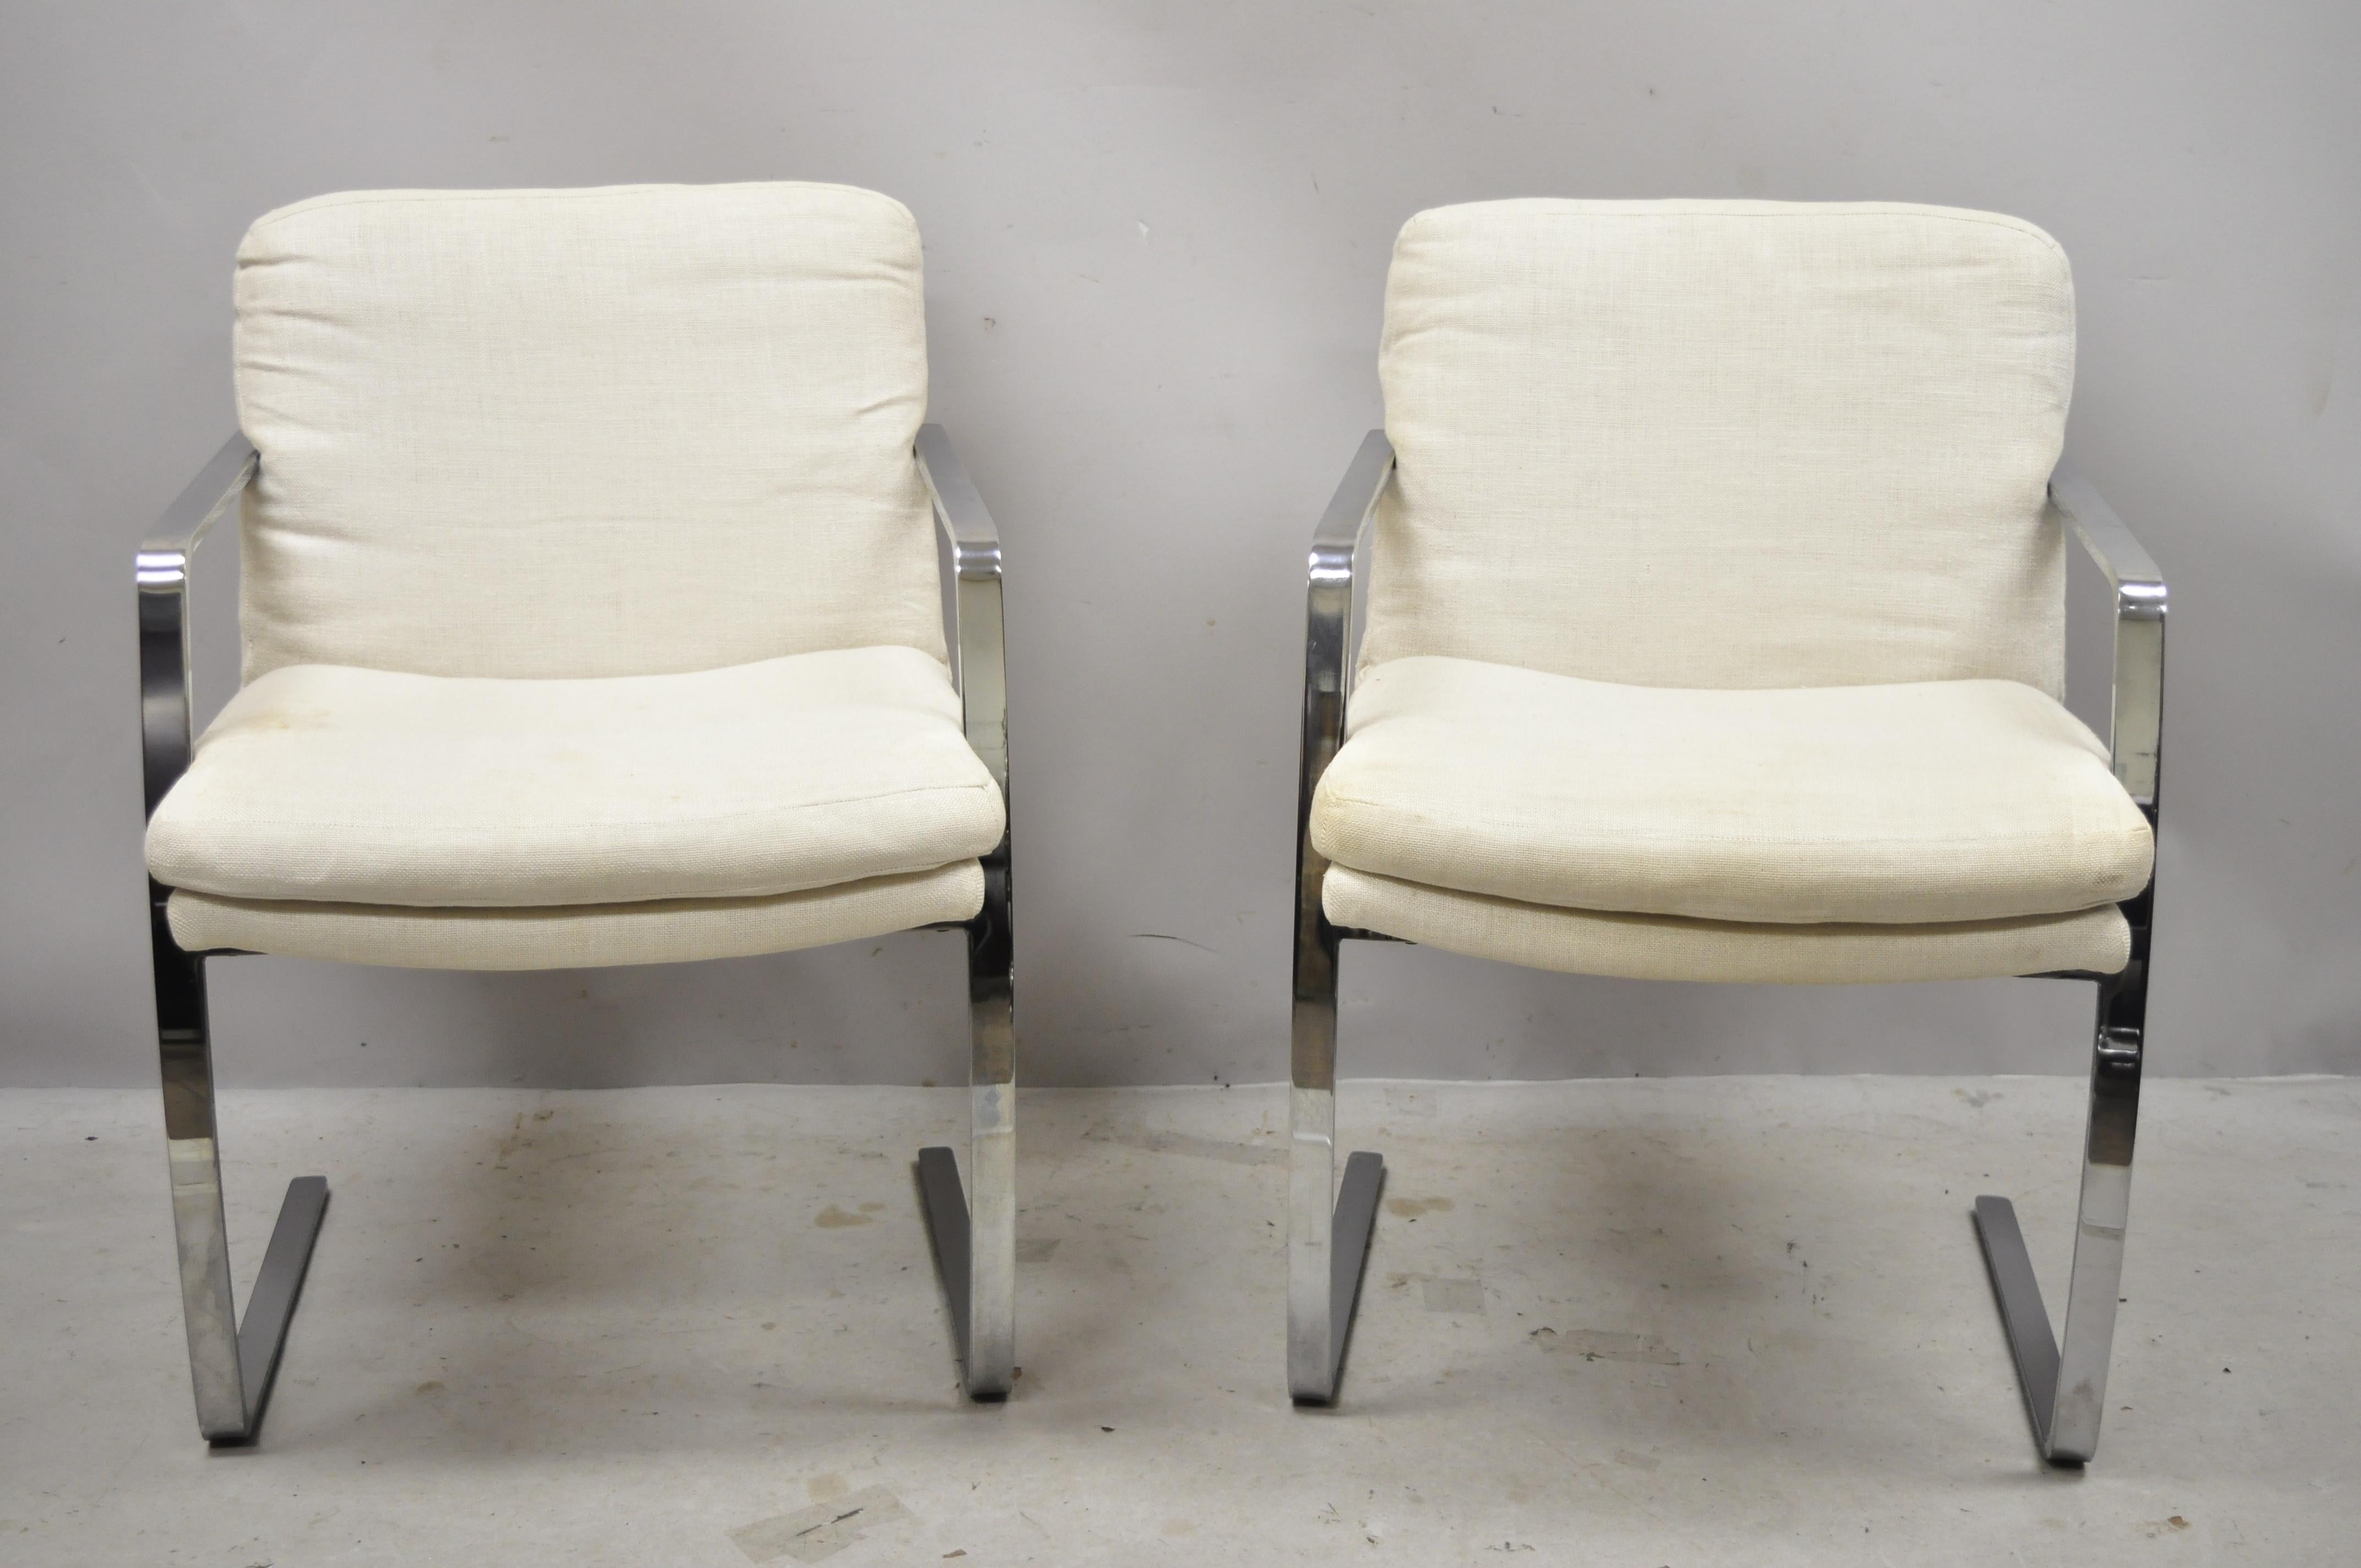 Vintage Mid-Century Modern BRNO style chrome Cantilever lounge armchairs (B) - a pair. Item features heavy chrome plated steel cantilever frames, quality American craftsmanship, sleek sculptural form, circa mid-late 20th century. Measurements: 33